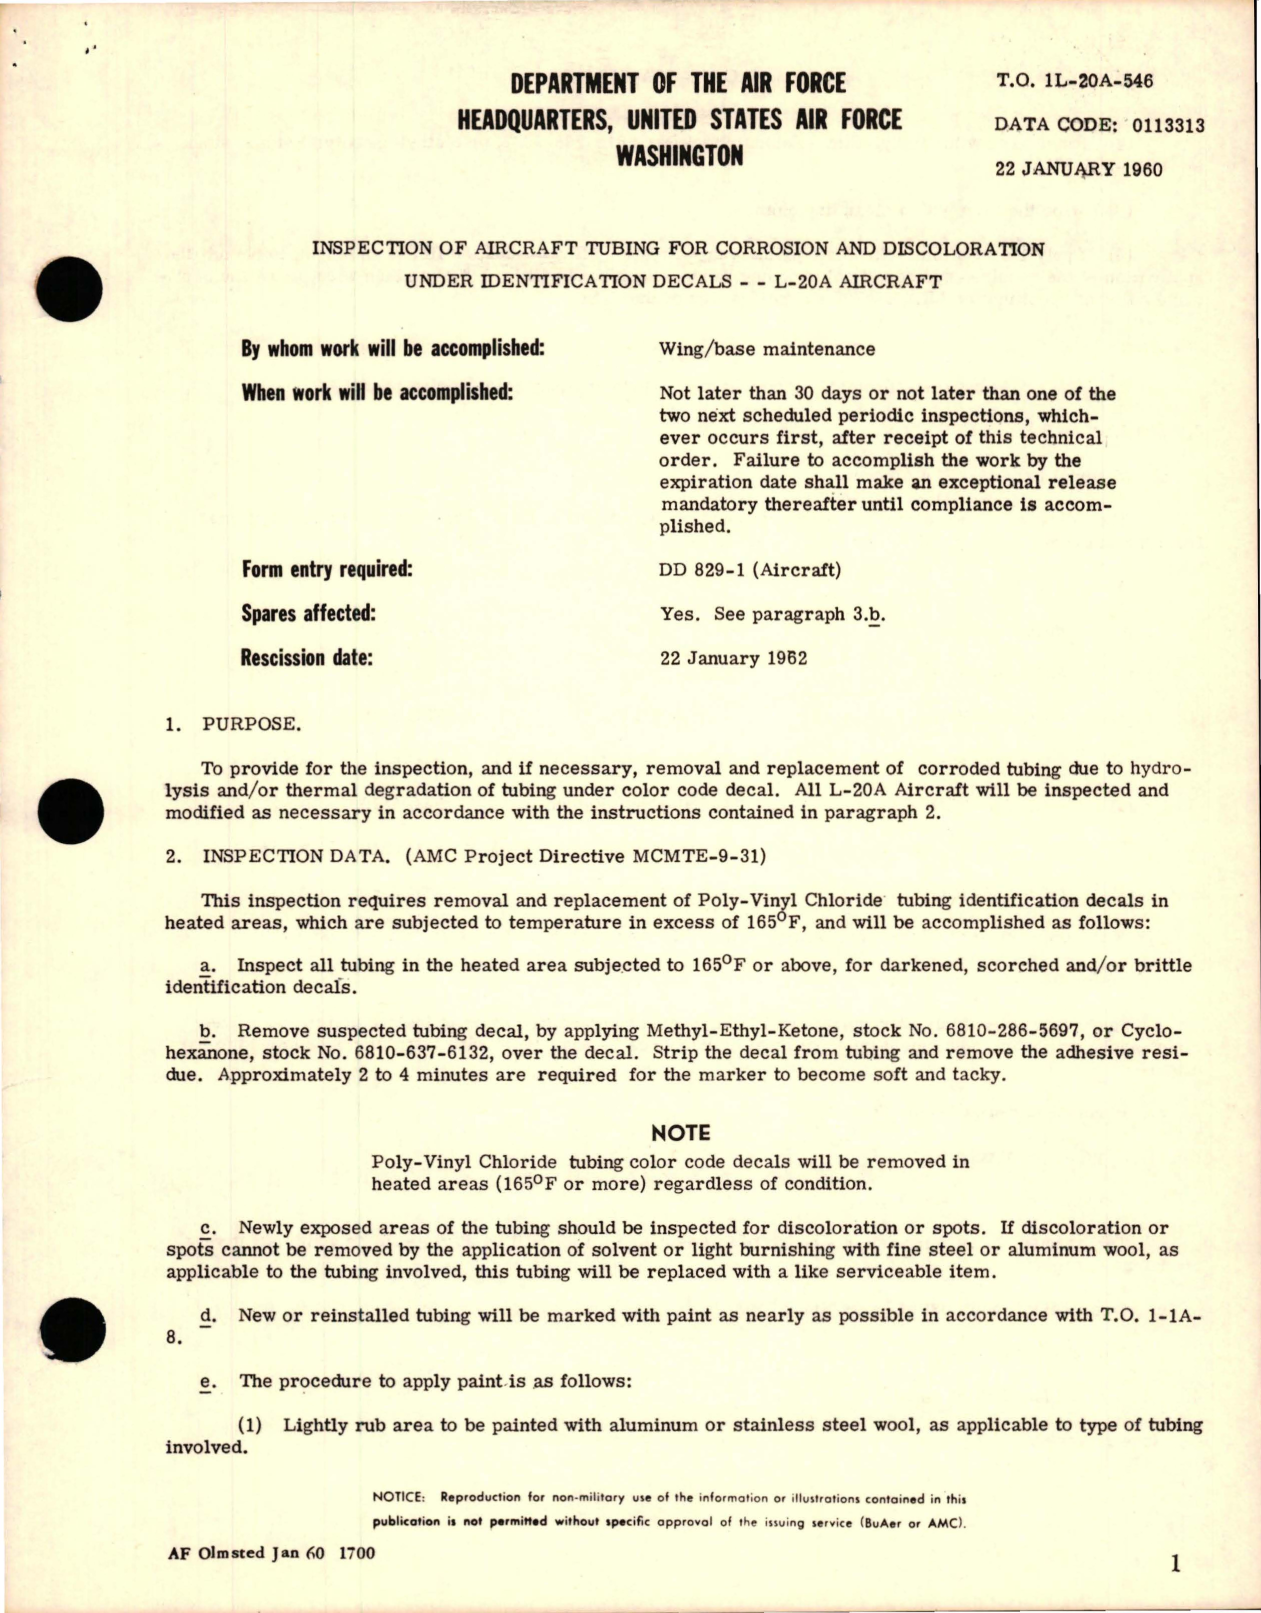 Sample page 1 from AirCorps Library document: Inspection of Tubing for Corrosion and Discoloration Under Identification Decals - L-20A